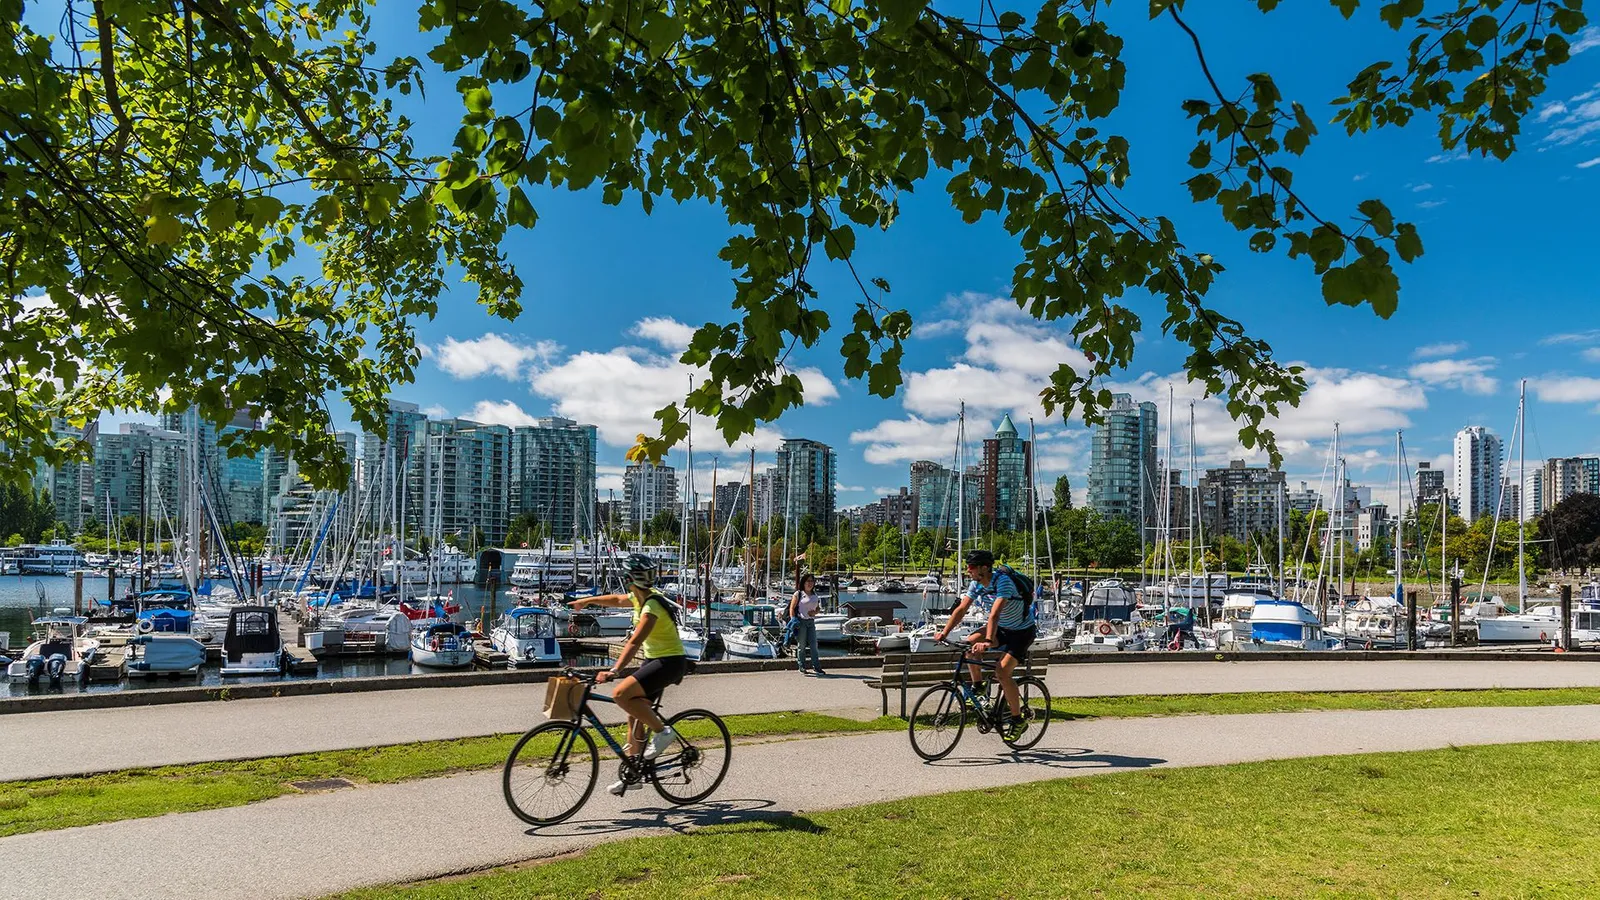 The city of Vancouver: How does a city make you feel good?